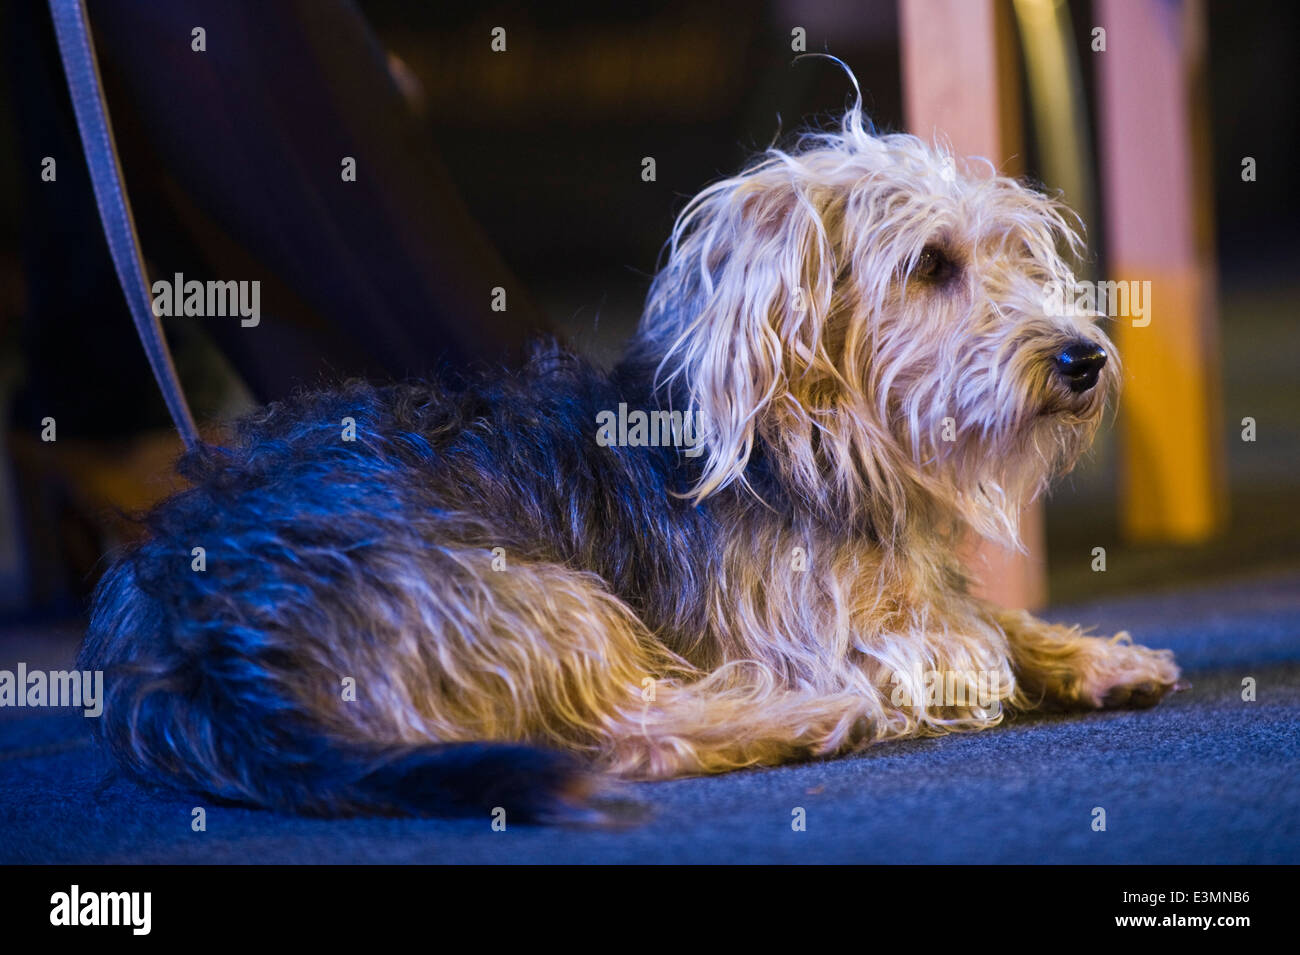 Katharine Hamnett's dog taking part in 'Just Fashion' event at Hay Festival 2014 Stock Photo